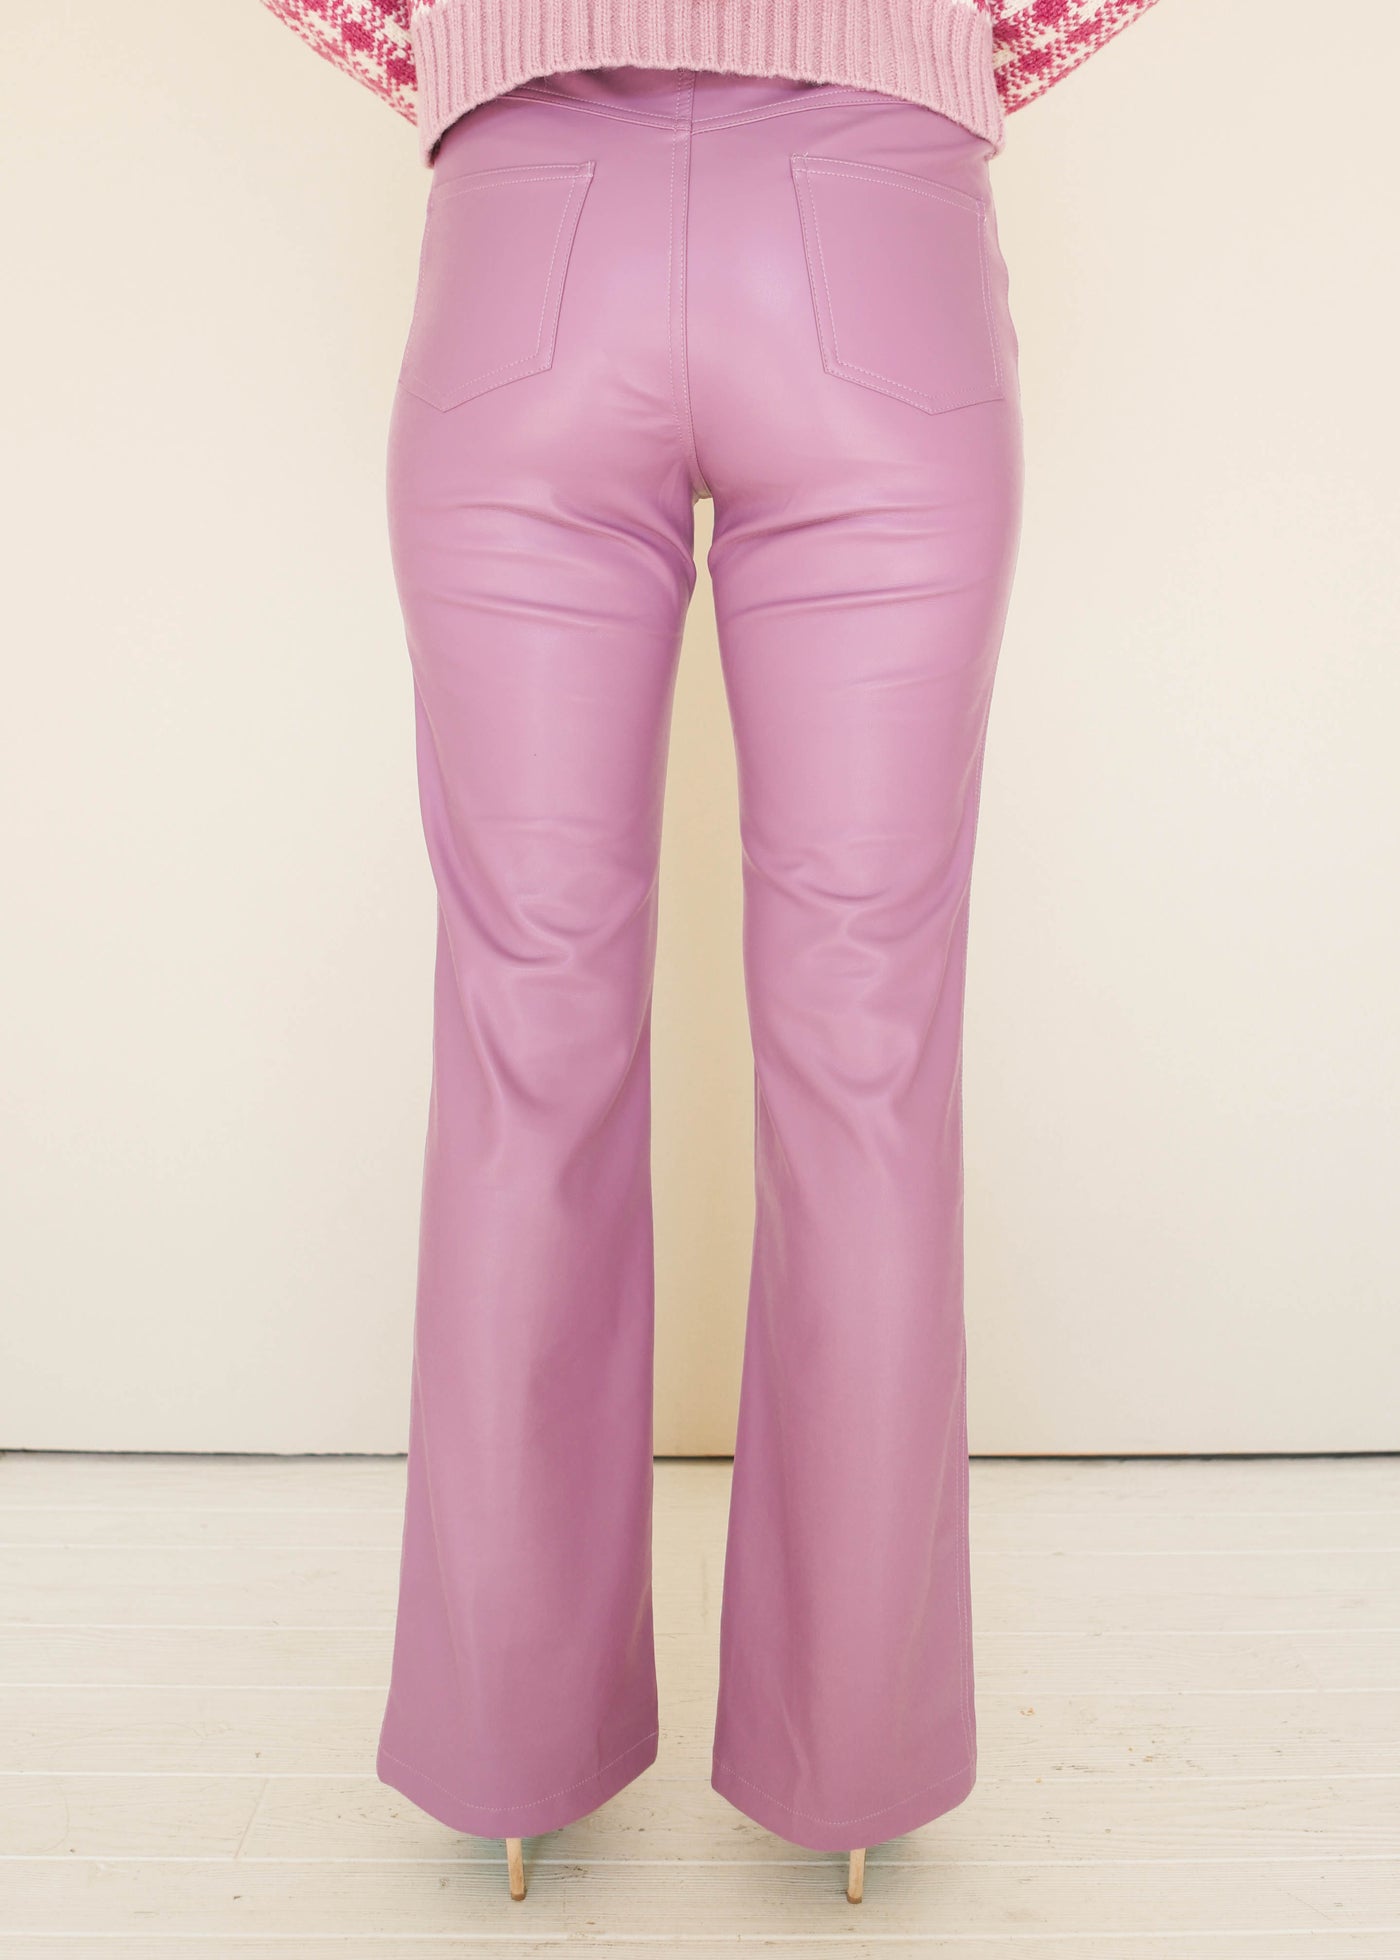 Friday Night Lilac Leather Pants - FINAL SALE